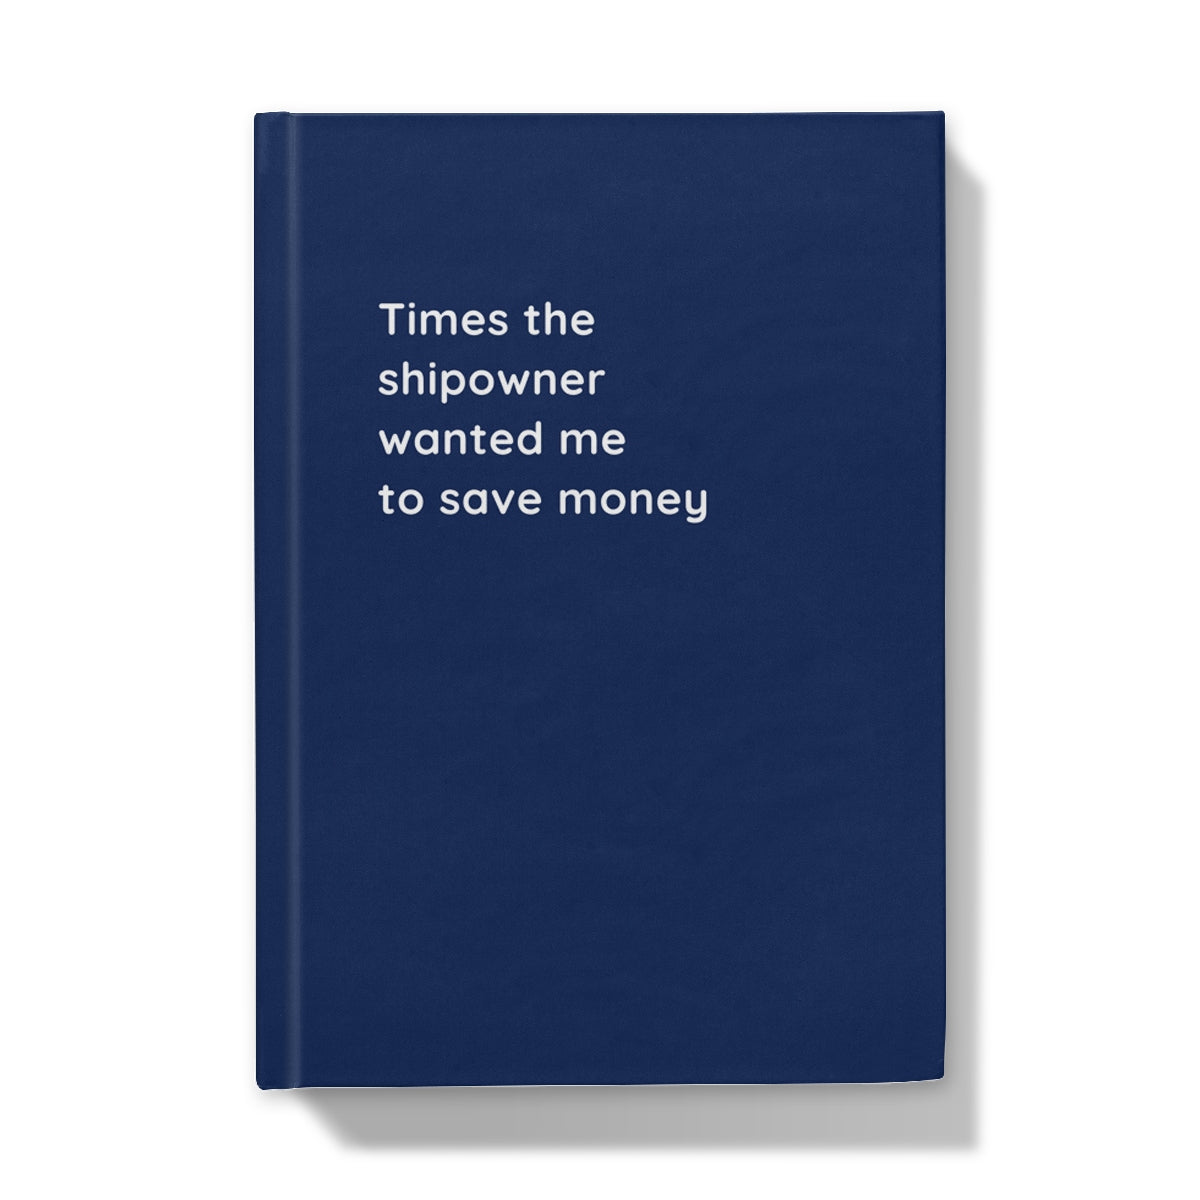 Hardback notebook (Times the shipowner wanted me to save money)